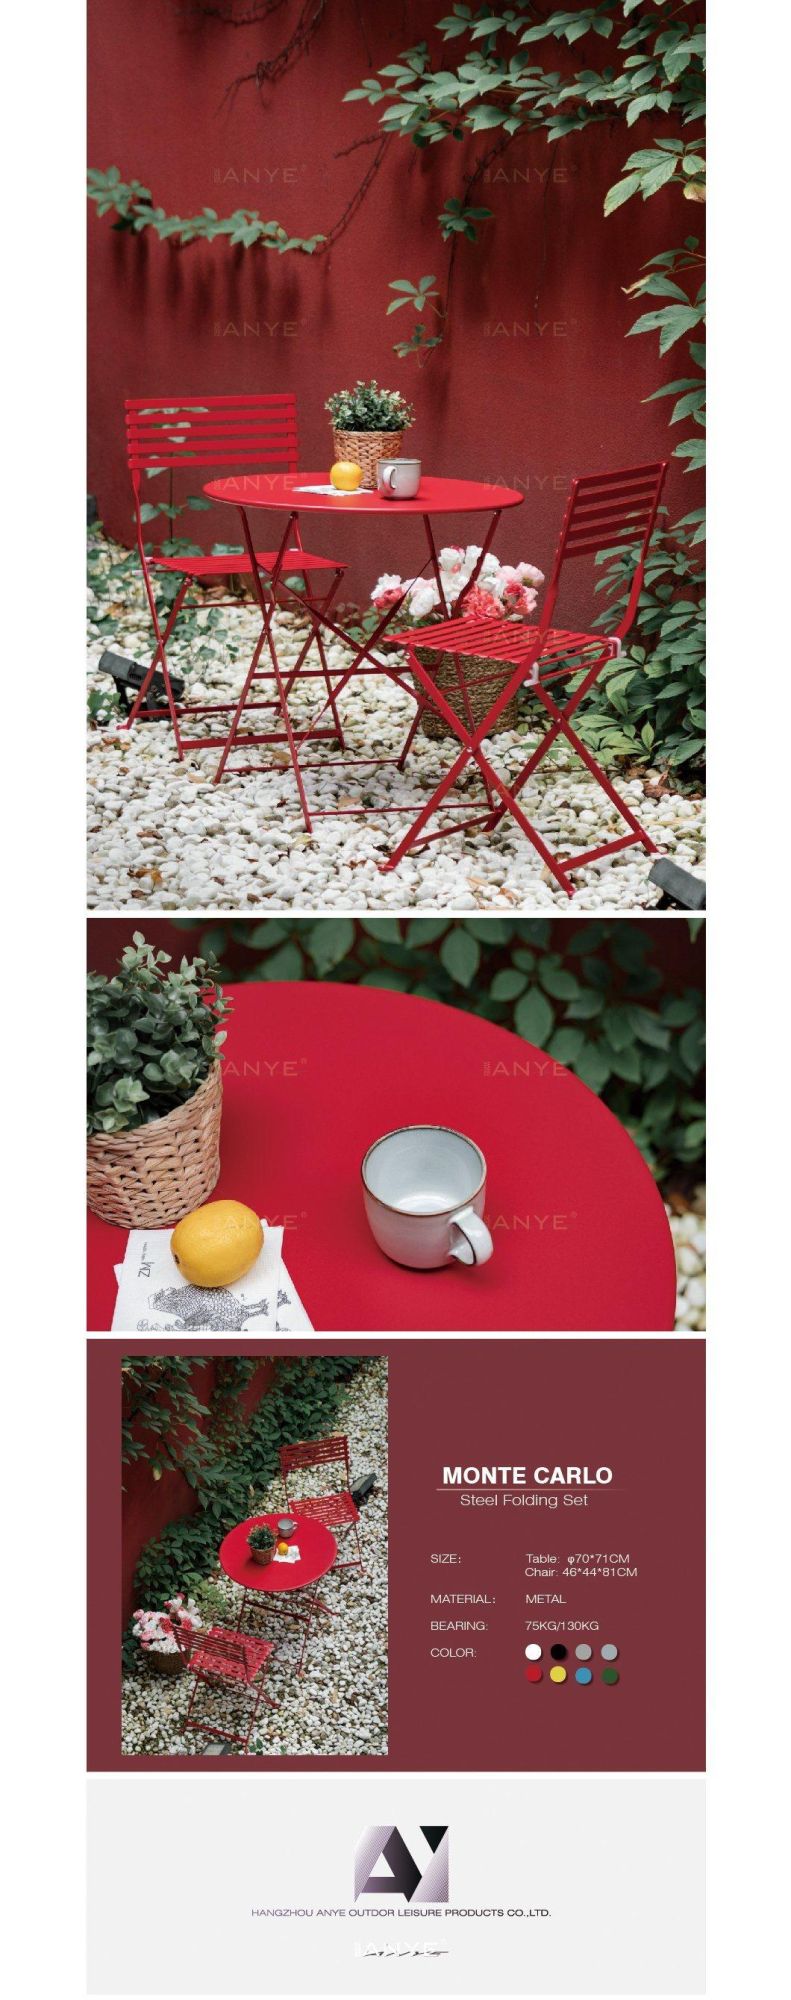 Garden Furniture Set Outdoor Waterproof Steel Folding Dining Furniture Table and Chair